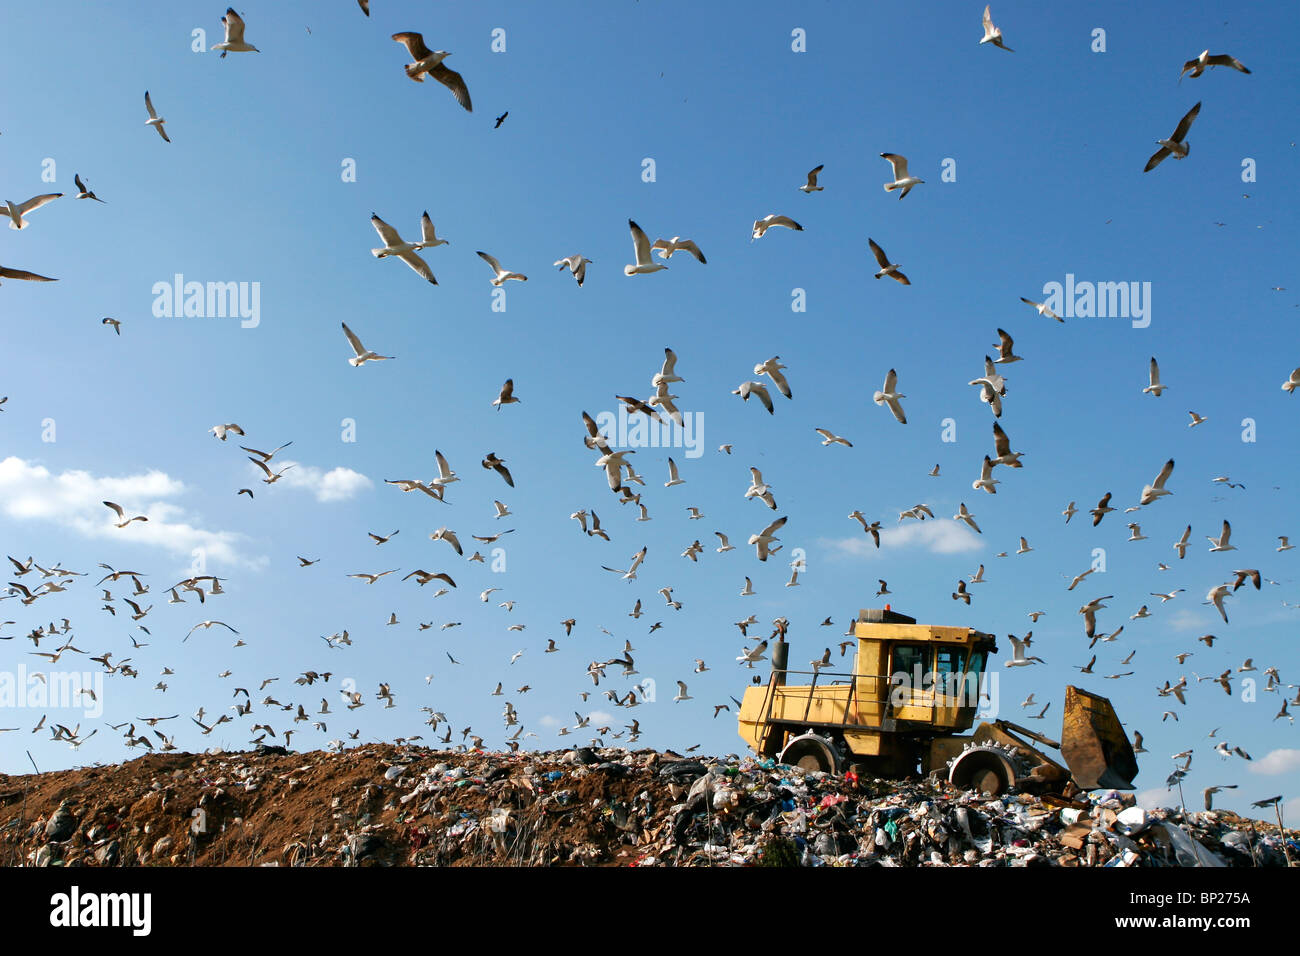 Landfill with bulldozer working, against beautiful blue sky full of sea birds. Great for environment and ecological themes Stock Photo